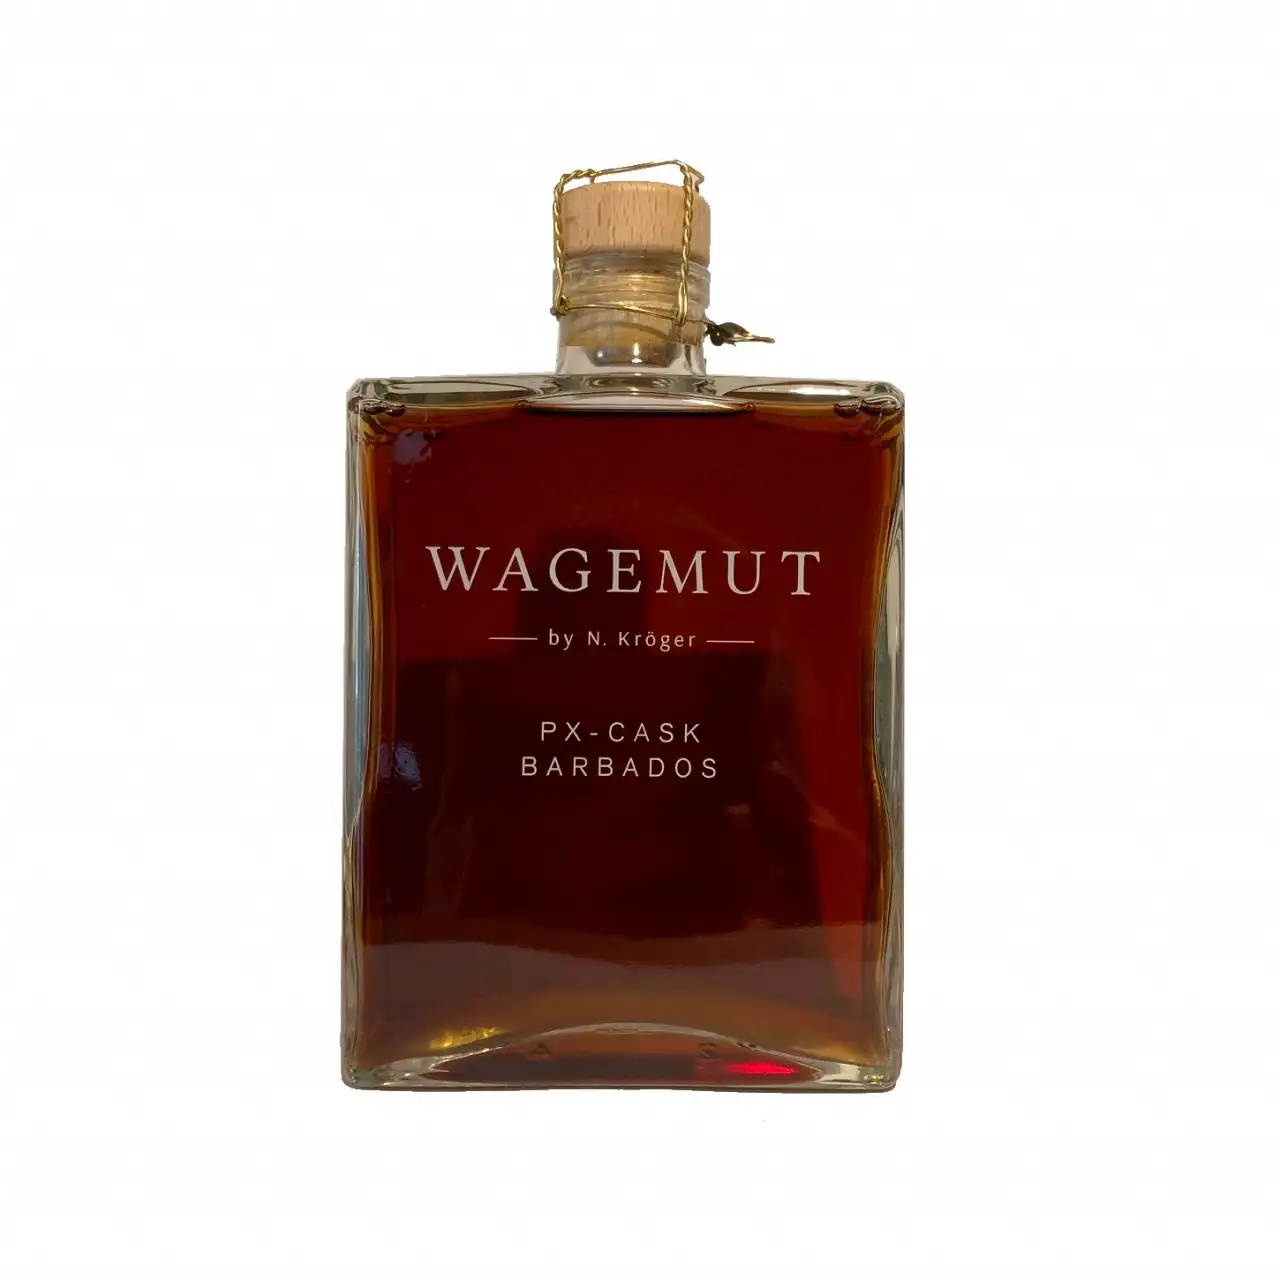 Image of the front of the bottle of the rum Wagemut PX-Cask